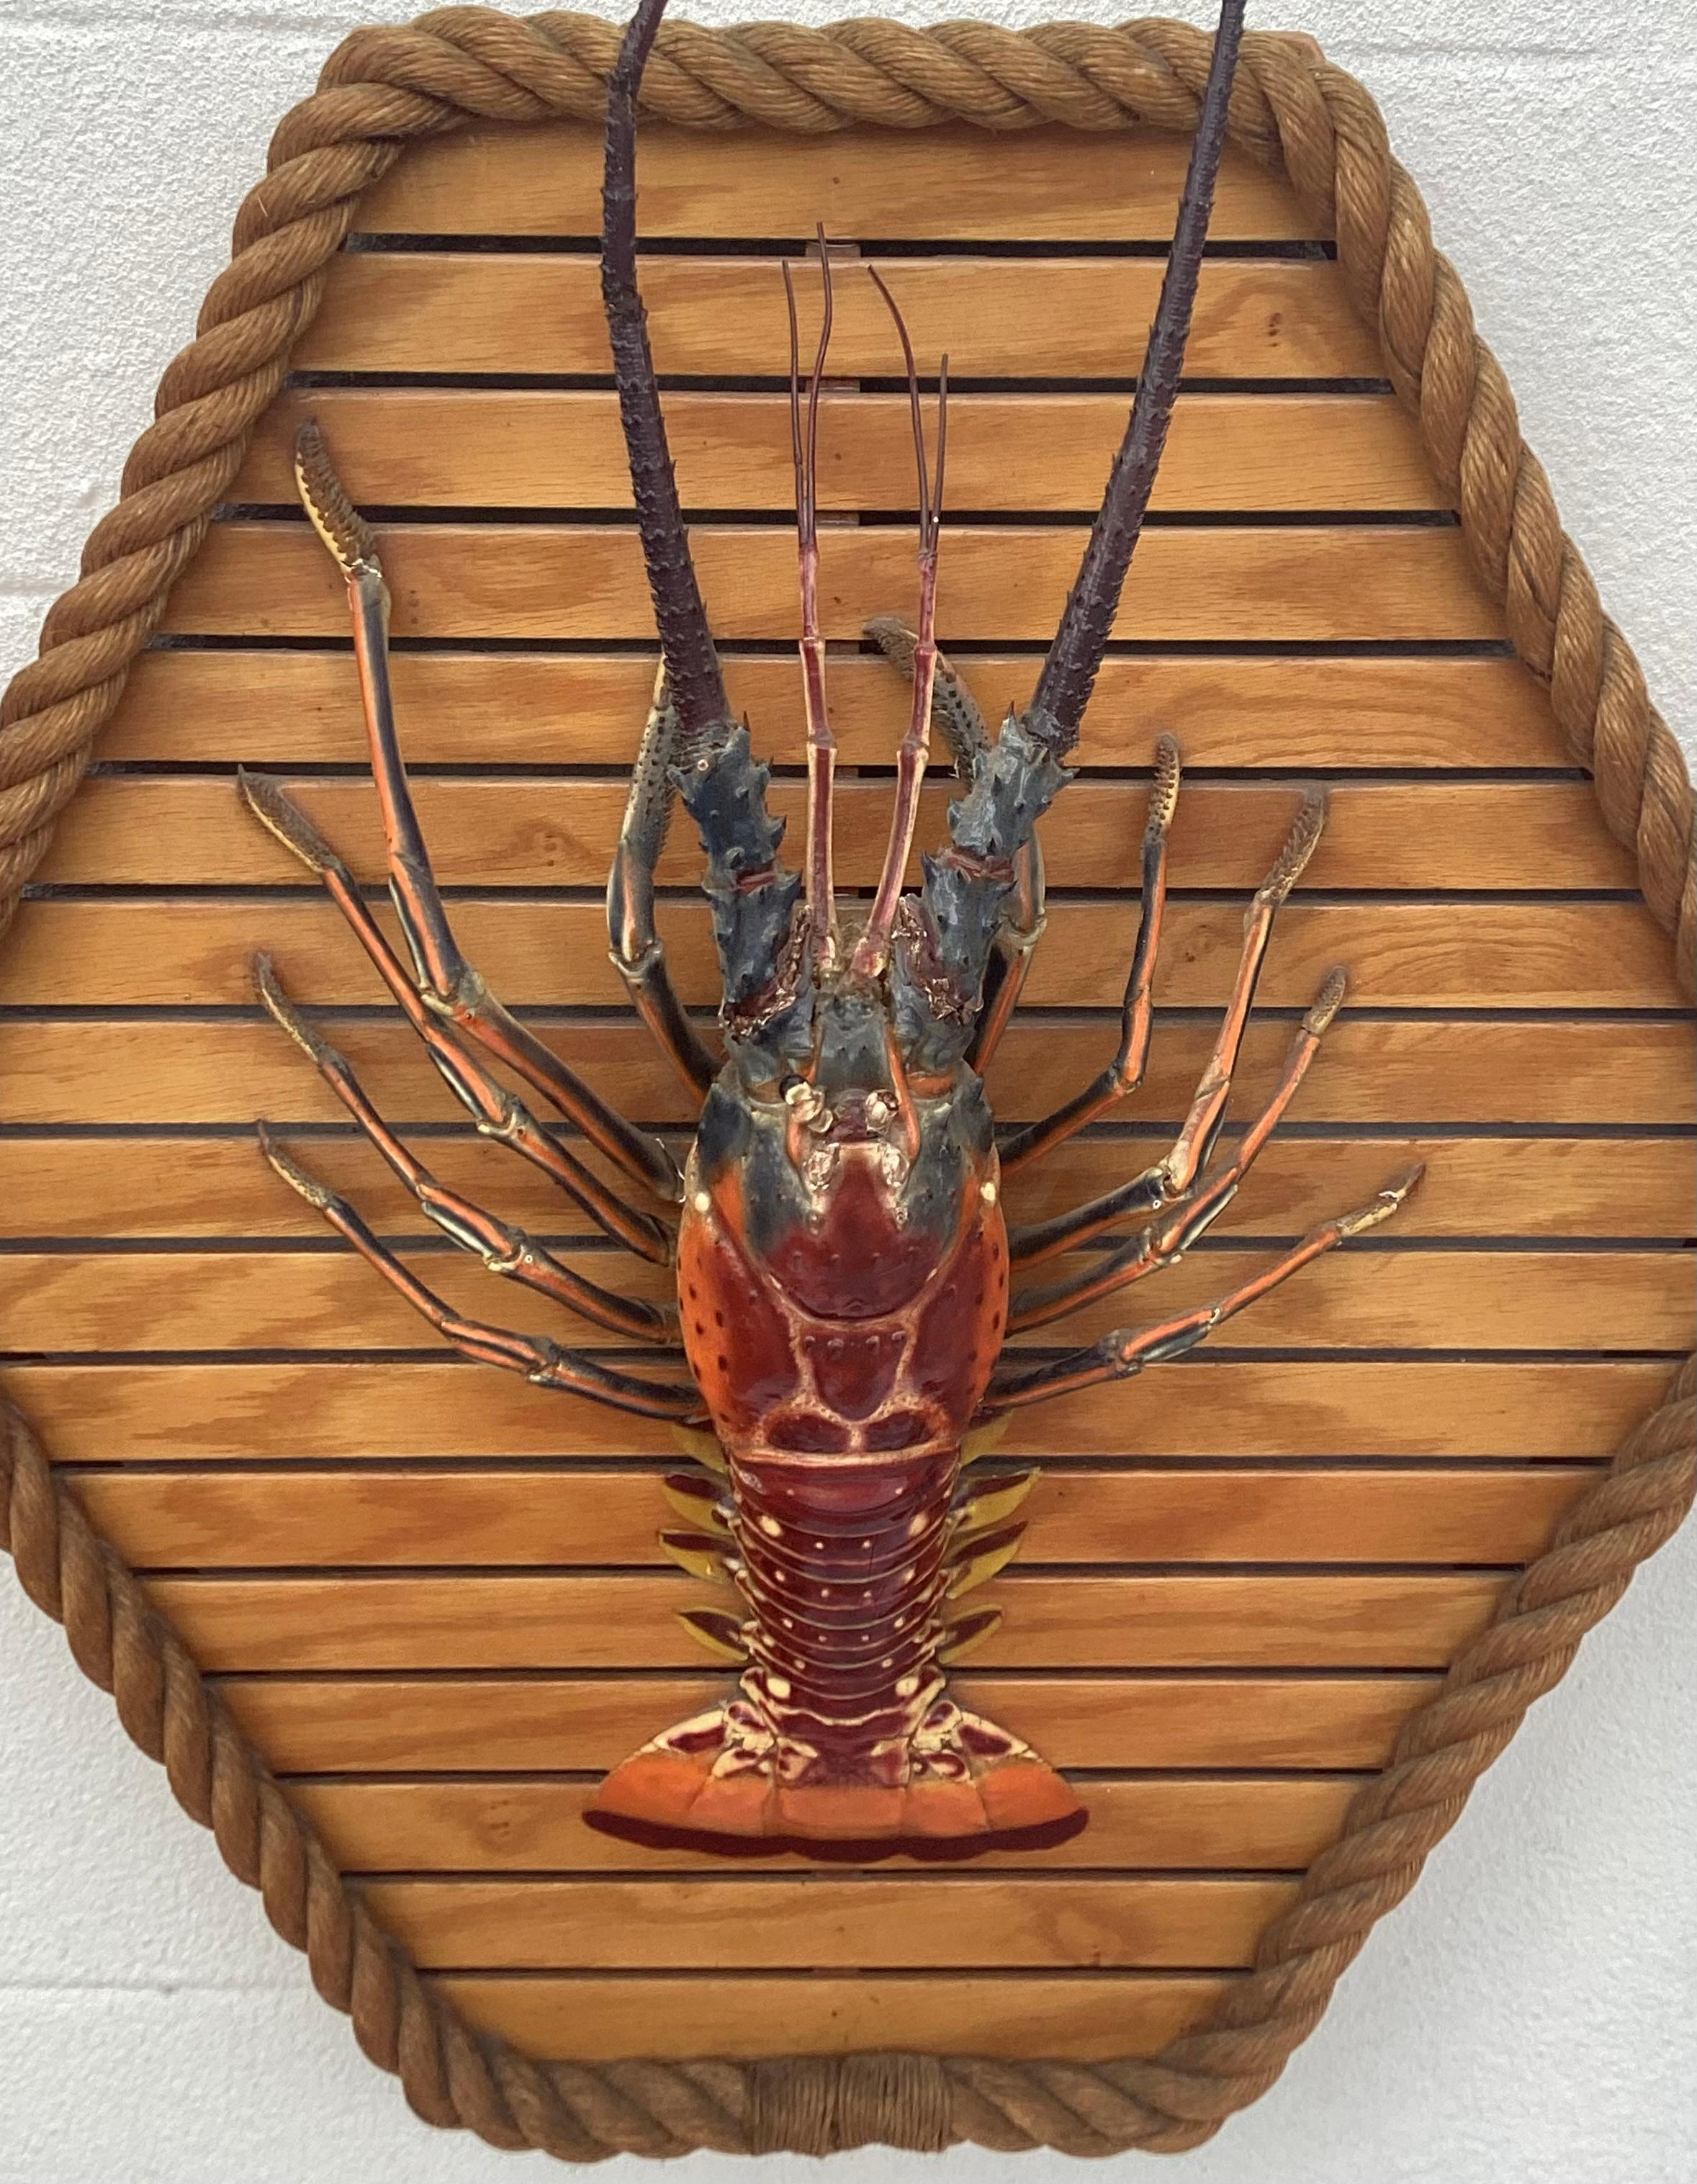 Vintage taxidermy whole lobster mounted on wood and rope frame in a nautical style. The lobster is skillfully prepared with original taxidermist card on back side of hexagon shaped mounting. The wooden mount is trimmed in thick tightly wound rope.